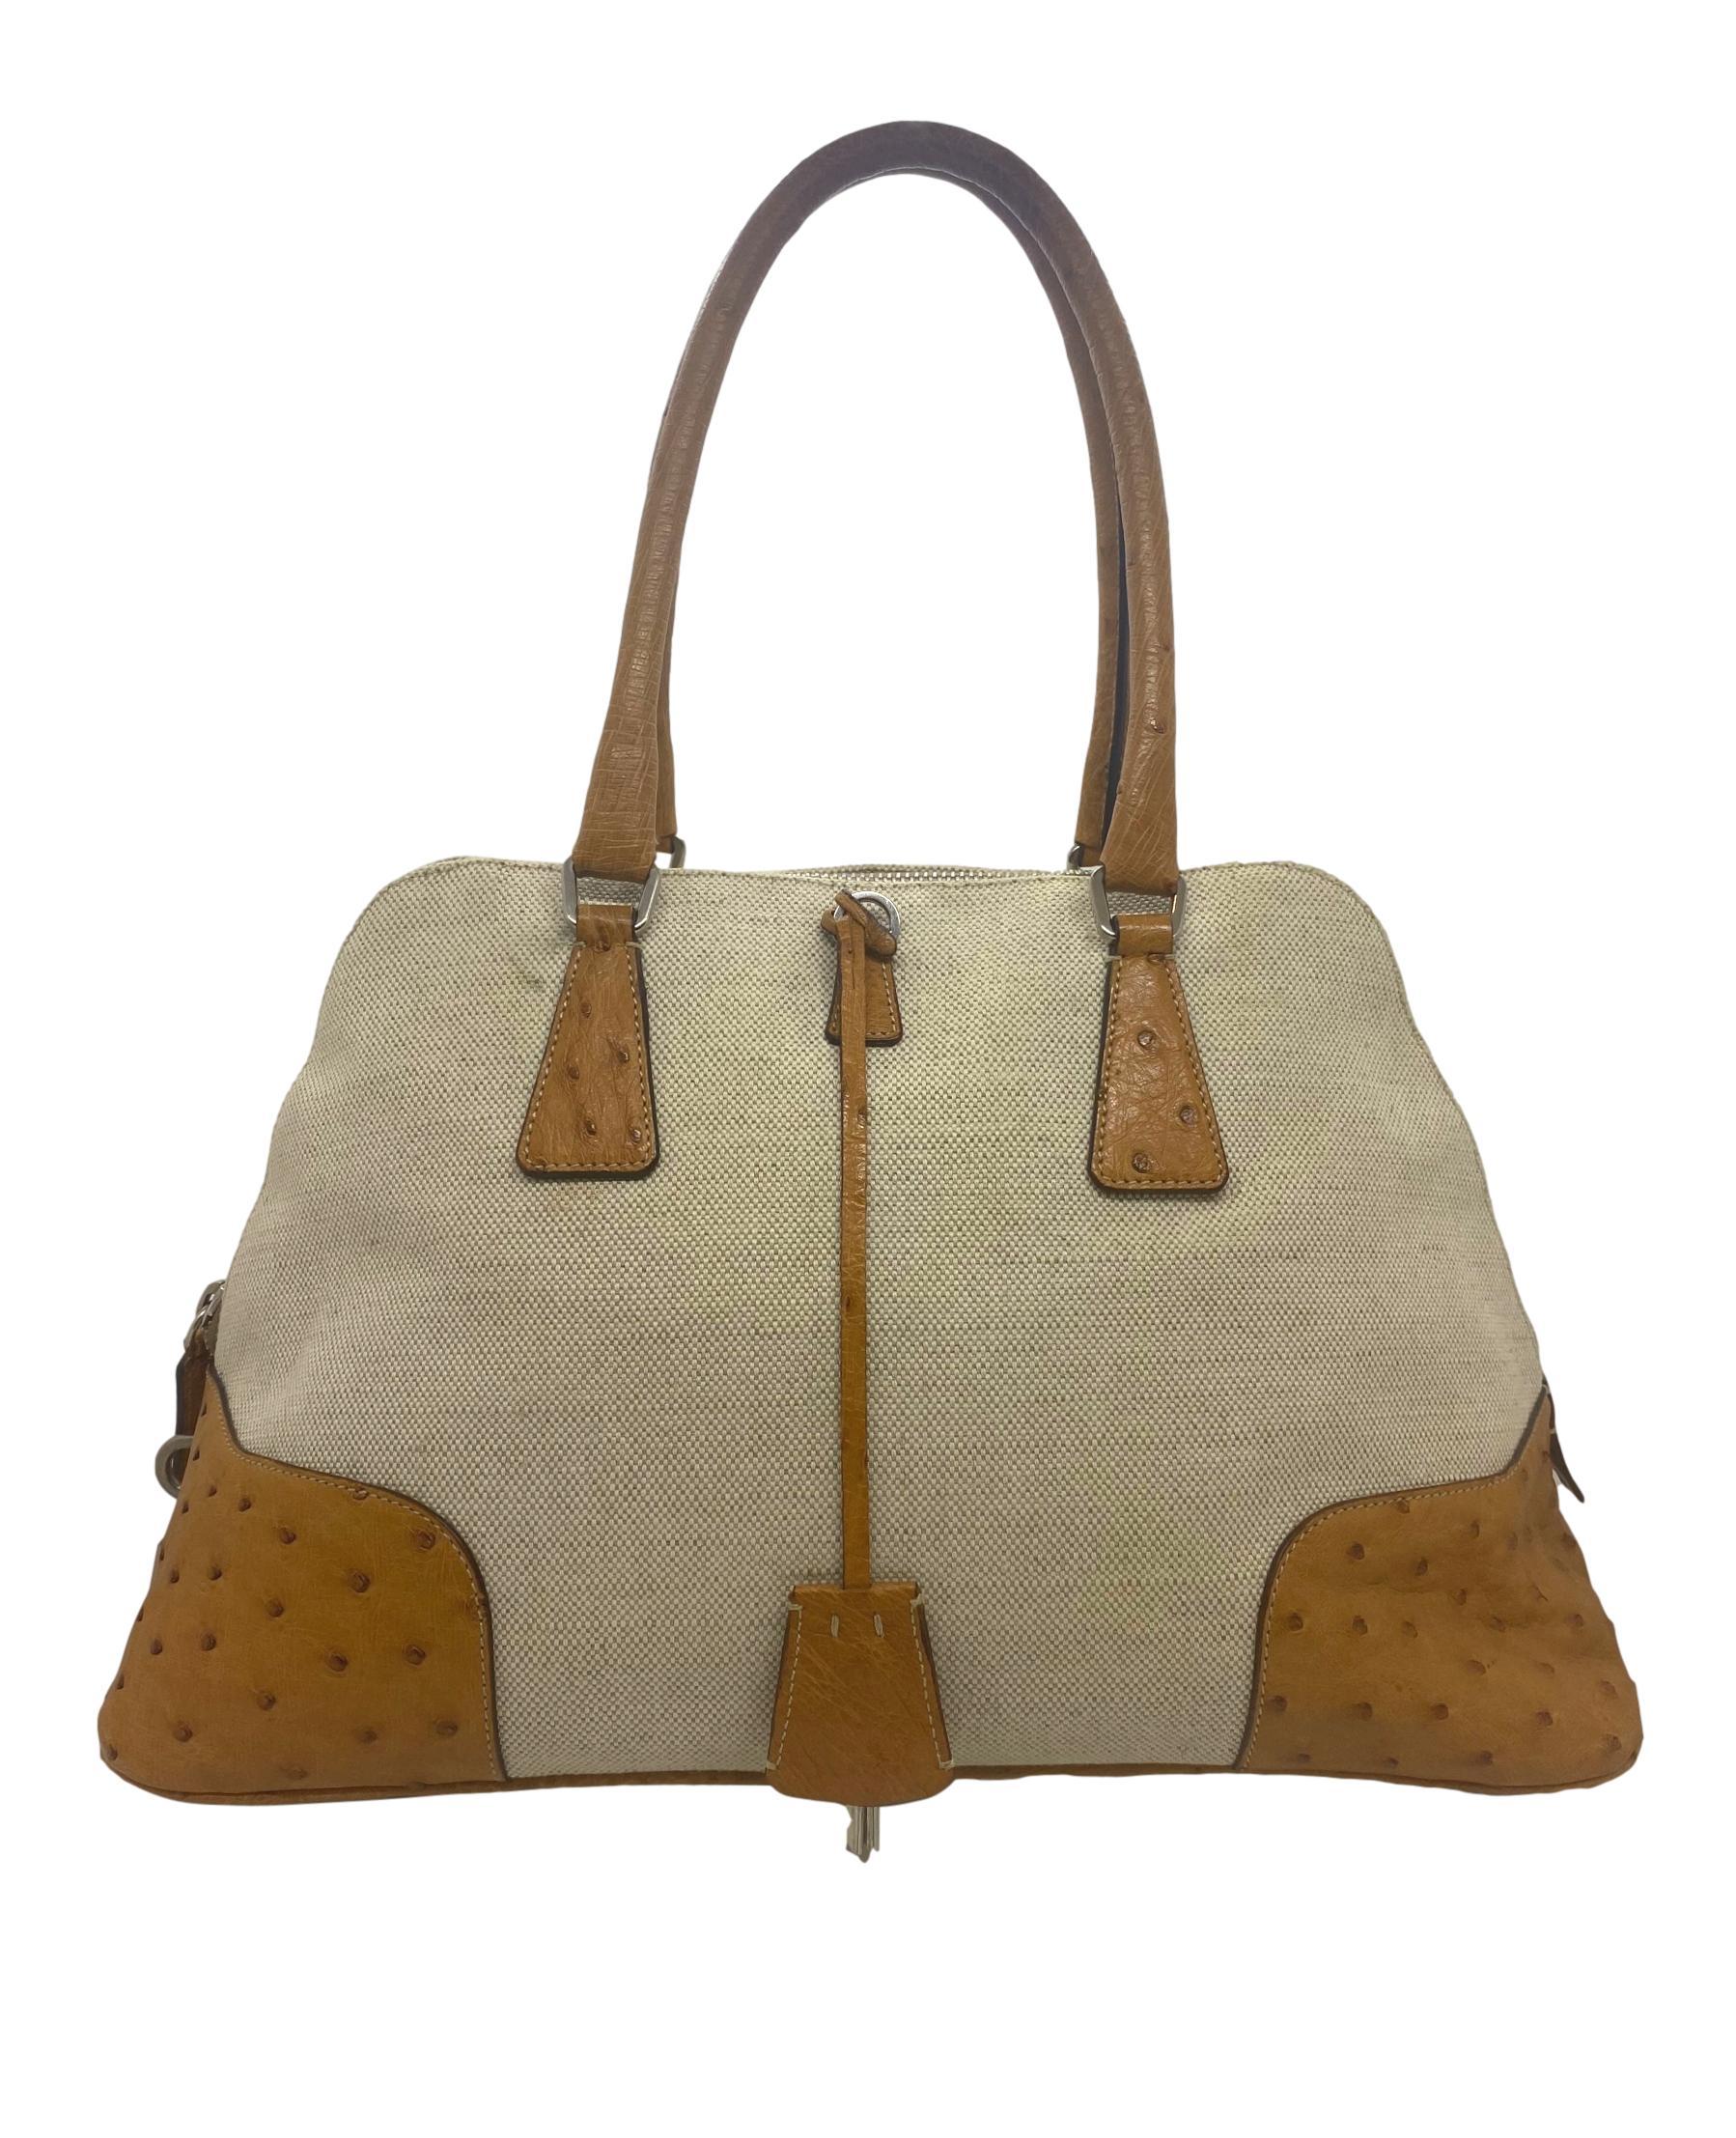 Prada Natural Canvas Cognac Ostrich Trimmed Bowling Top Handle Handbag, 2000. Founded by Mario Prada in 1913, Prada's flagship location opened in the Galleria Vittorio Emanuele II in Milan, the world's oldest shopping mall. By 1919, Prada officially